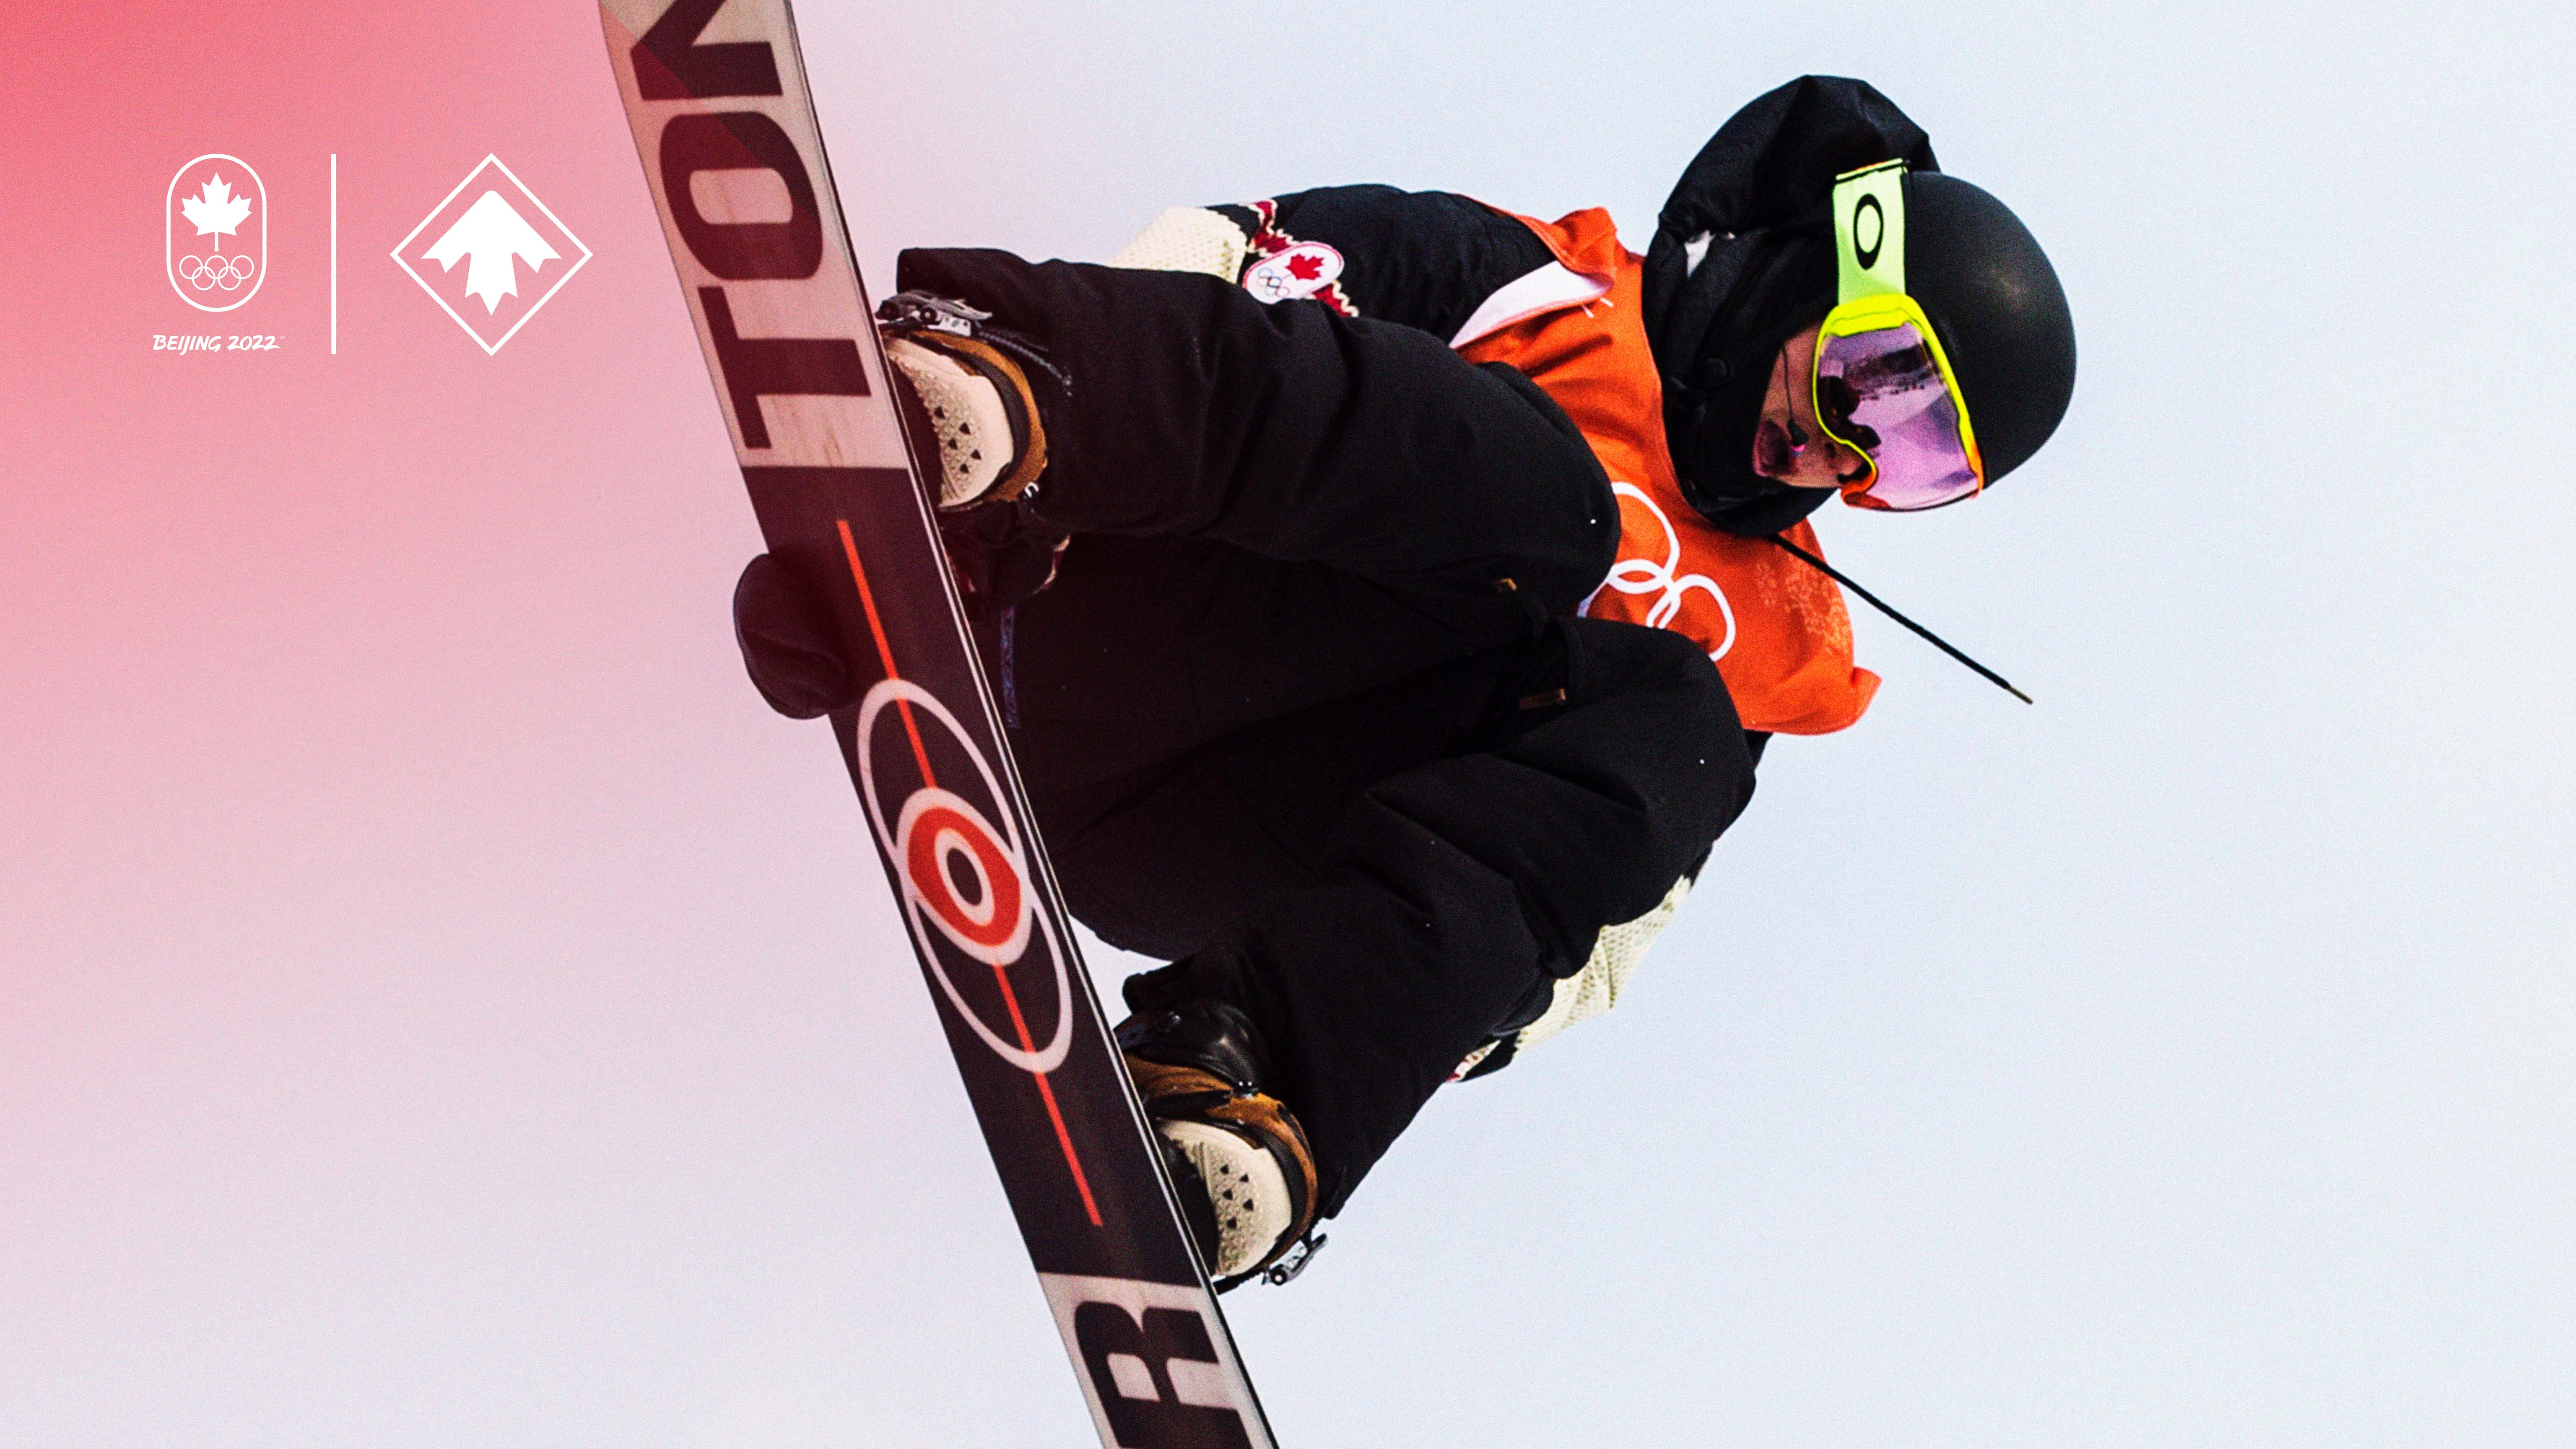 19 athletes nominated to represent Team Canada in snowboard at Beijing 2022  - Team Canada - Official Olympic Team Website